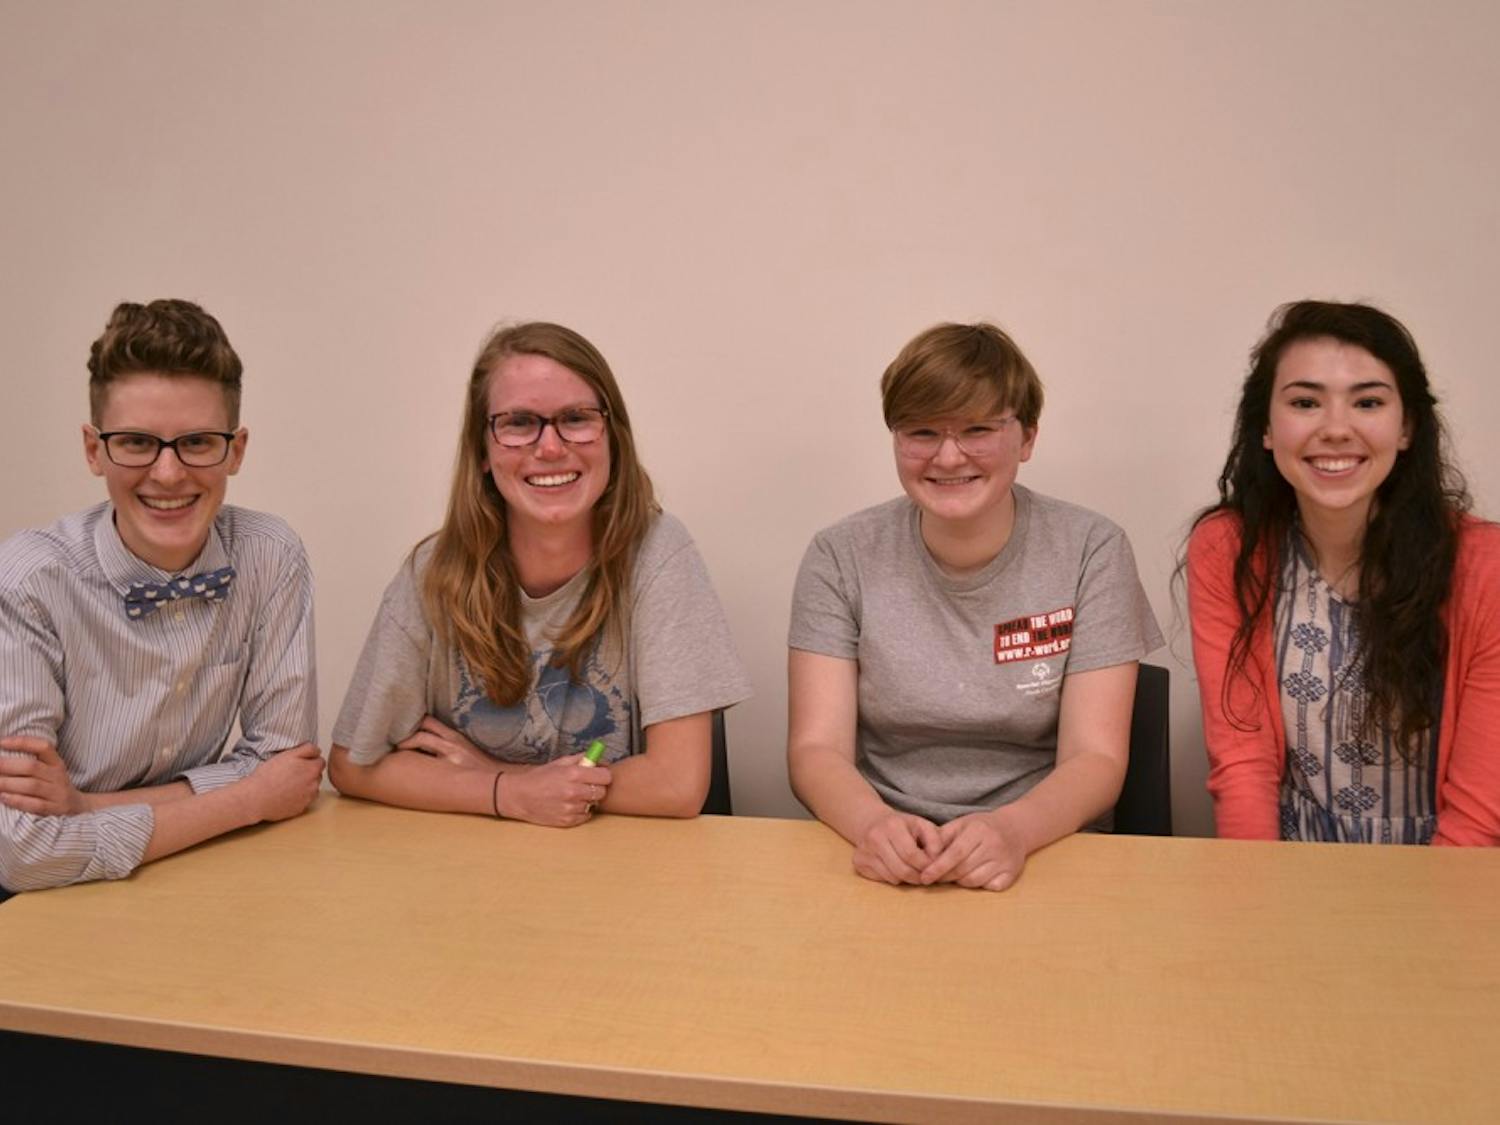 The panel coordinator, grad student Rae Jodrey with Adeline Dorough '16, Auden Tibbetts '19, and Madeline Ray '18 spoke about their non-visible disabilities on Thursday, April 14.